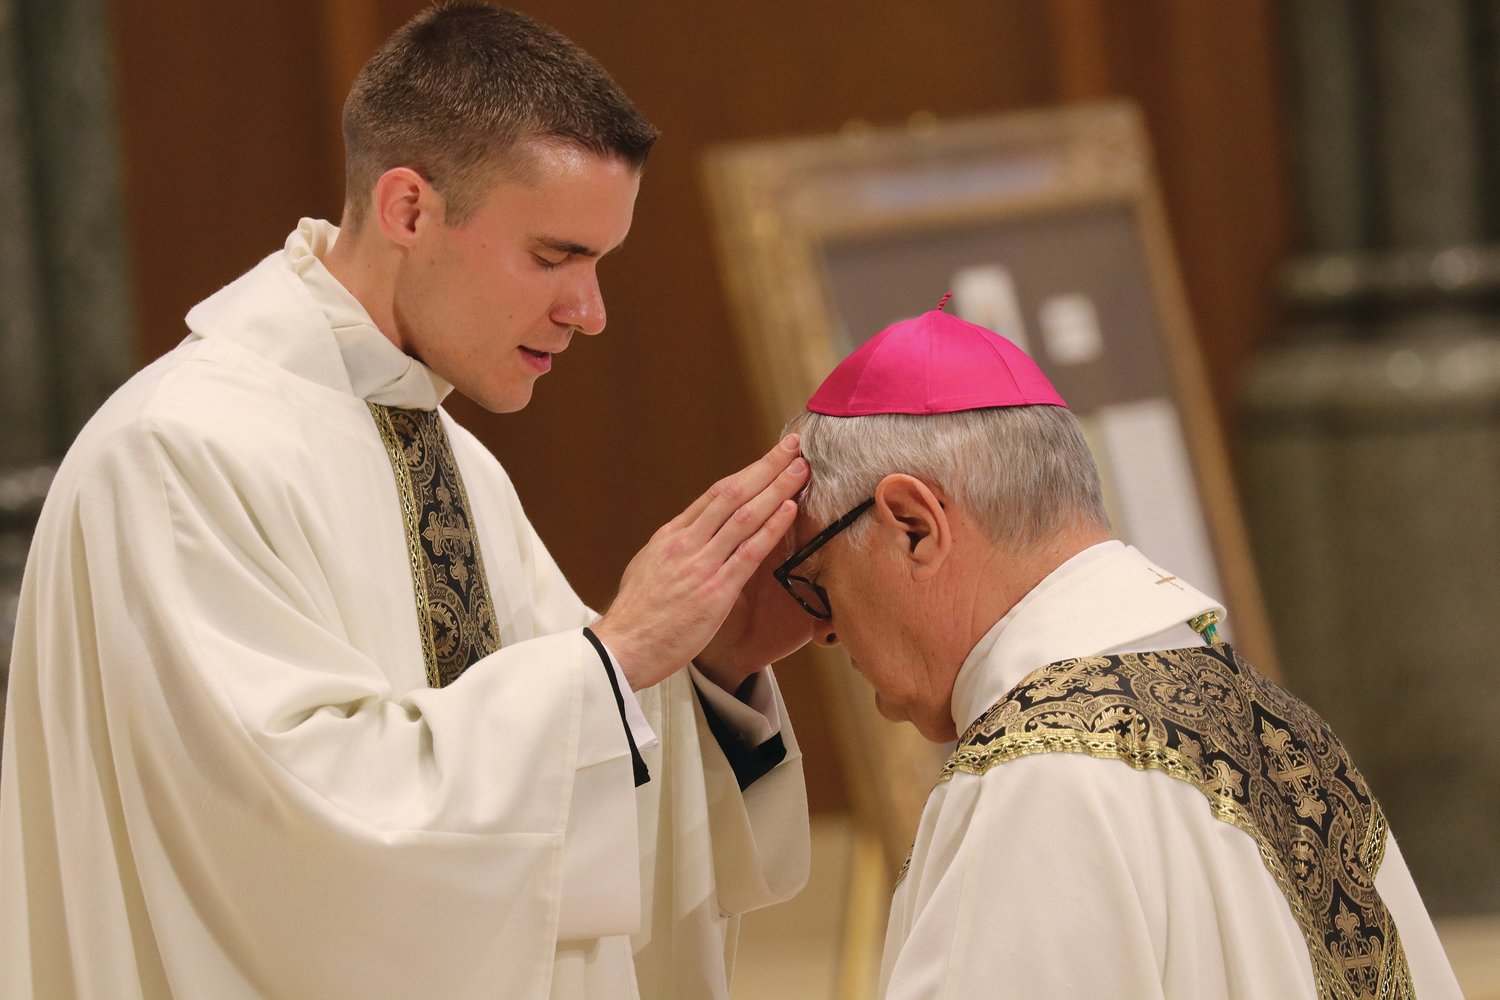 Father Gadoury confers a blessing upon Bishop Tobin.